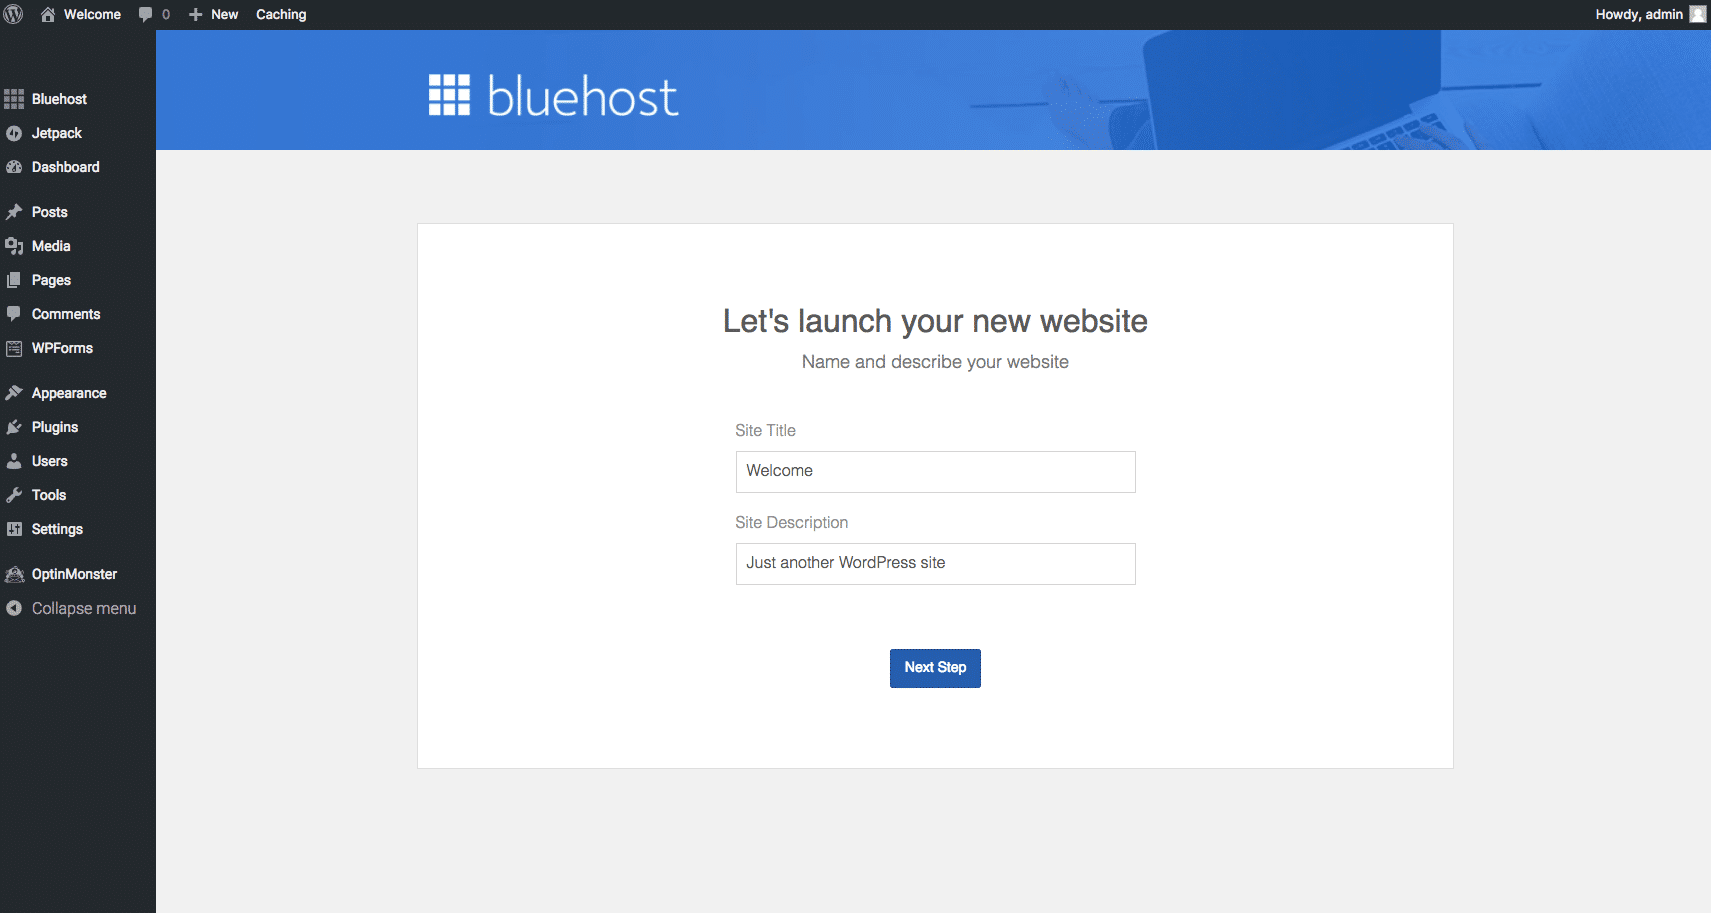 Bluehost screenshot with launching a website details